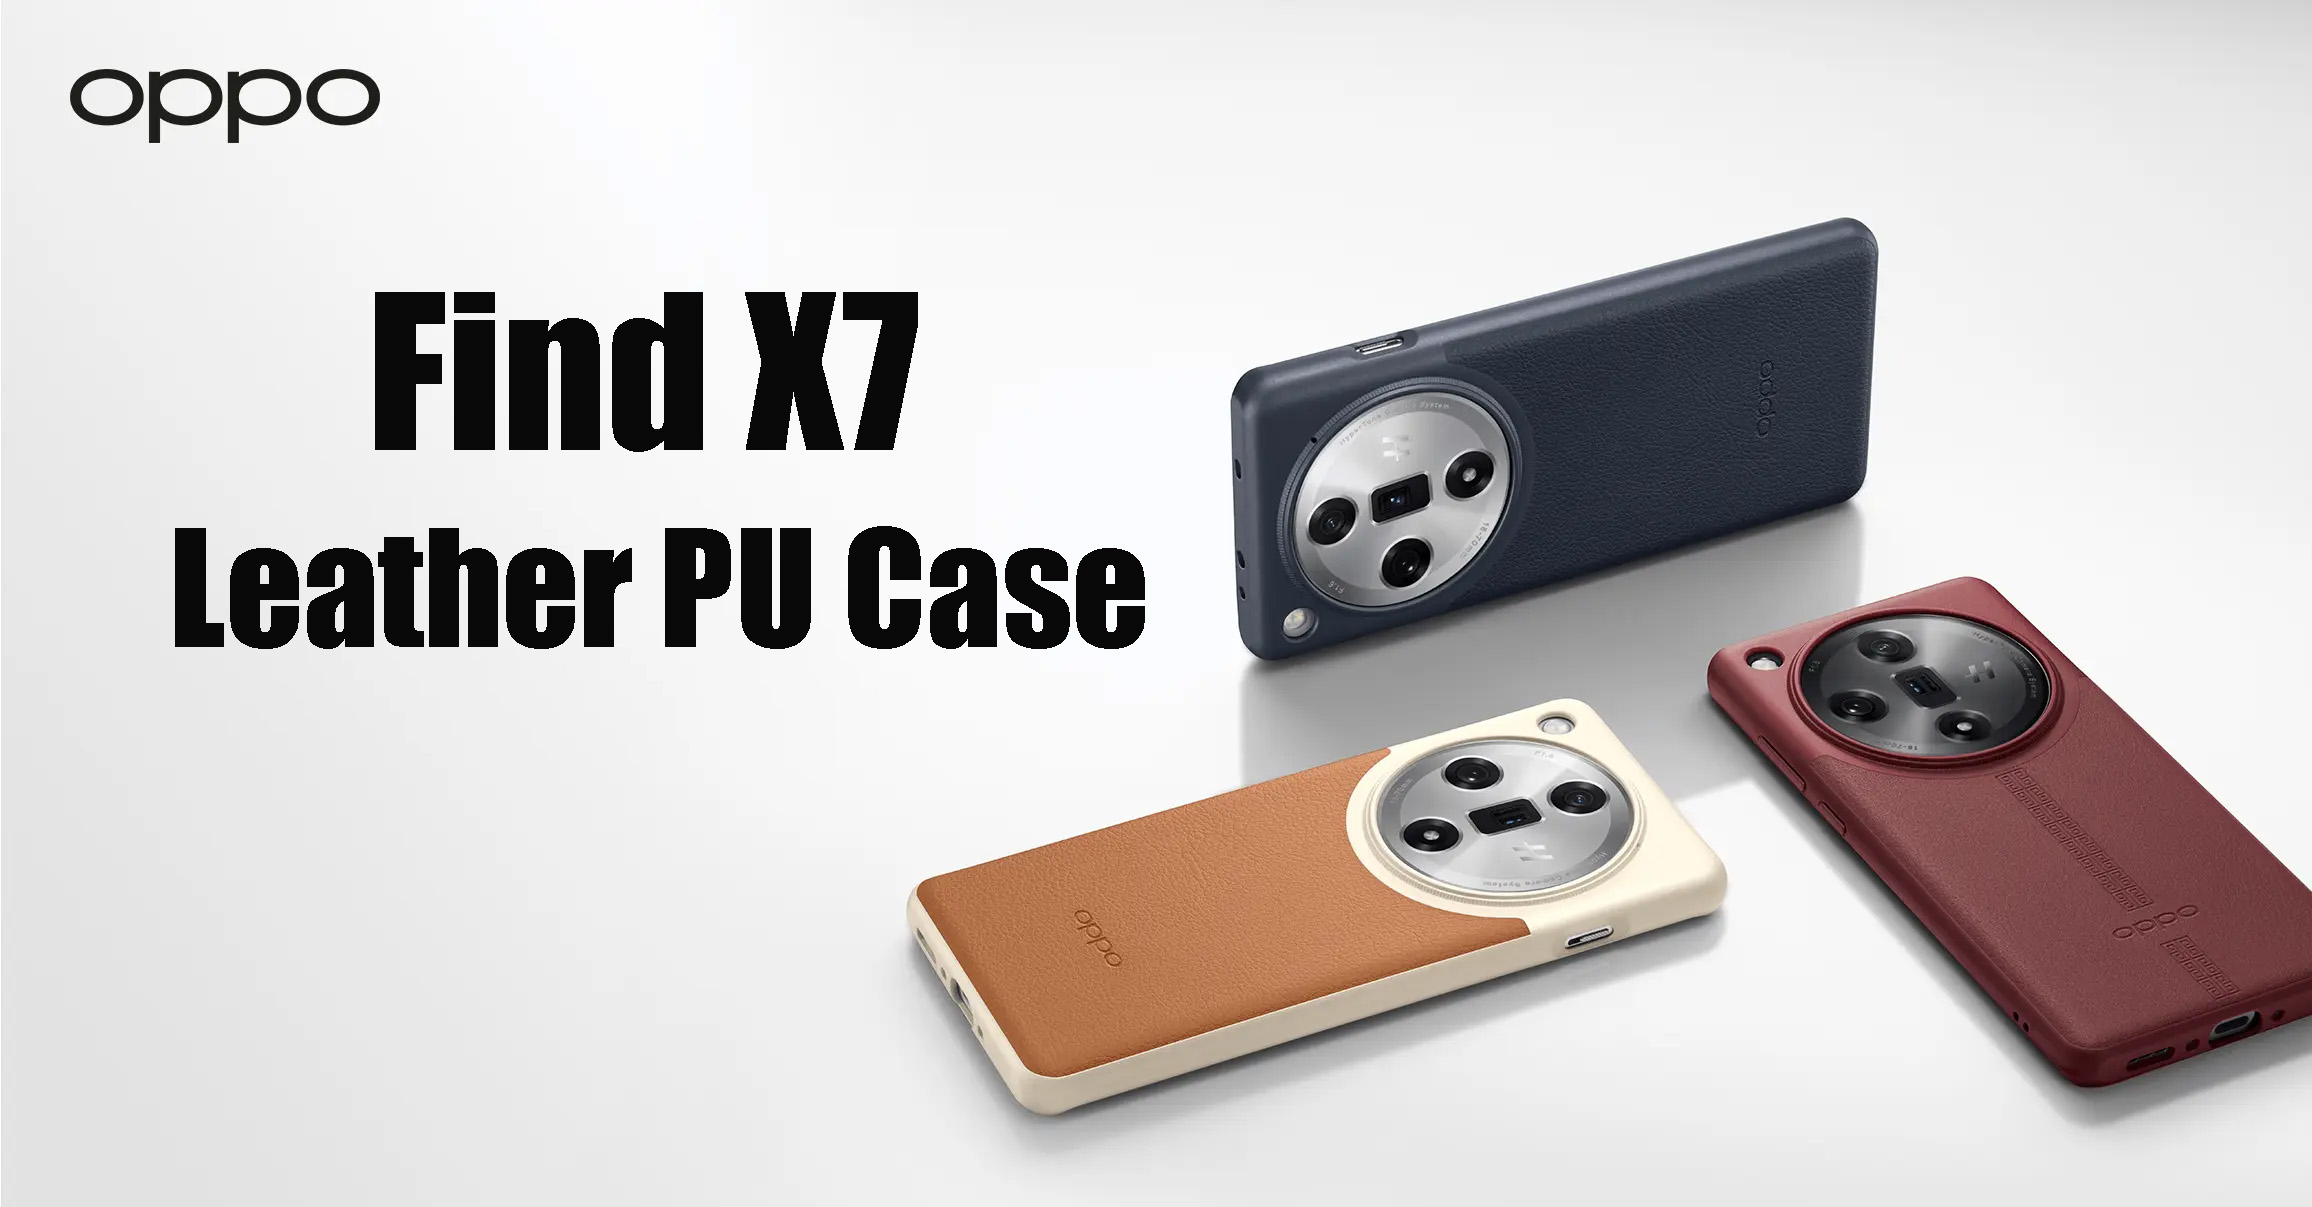 Official Original OPPO Find X7 Leather PU Case